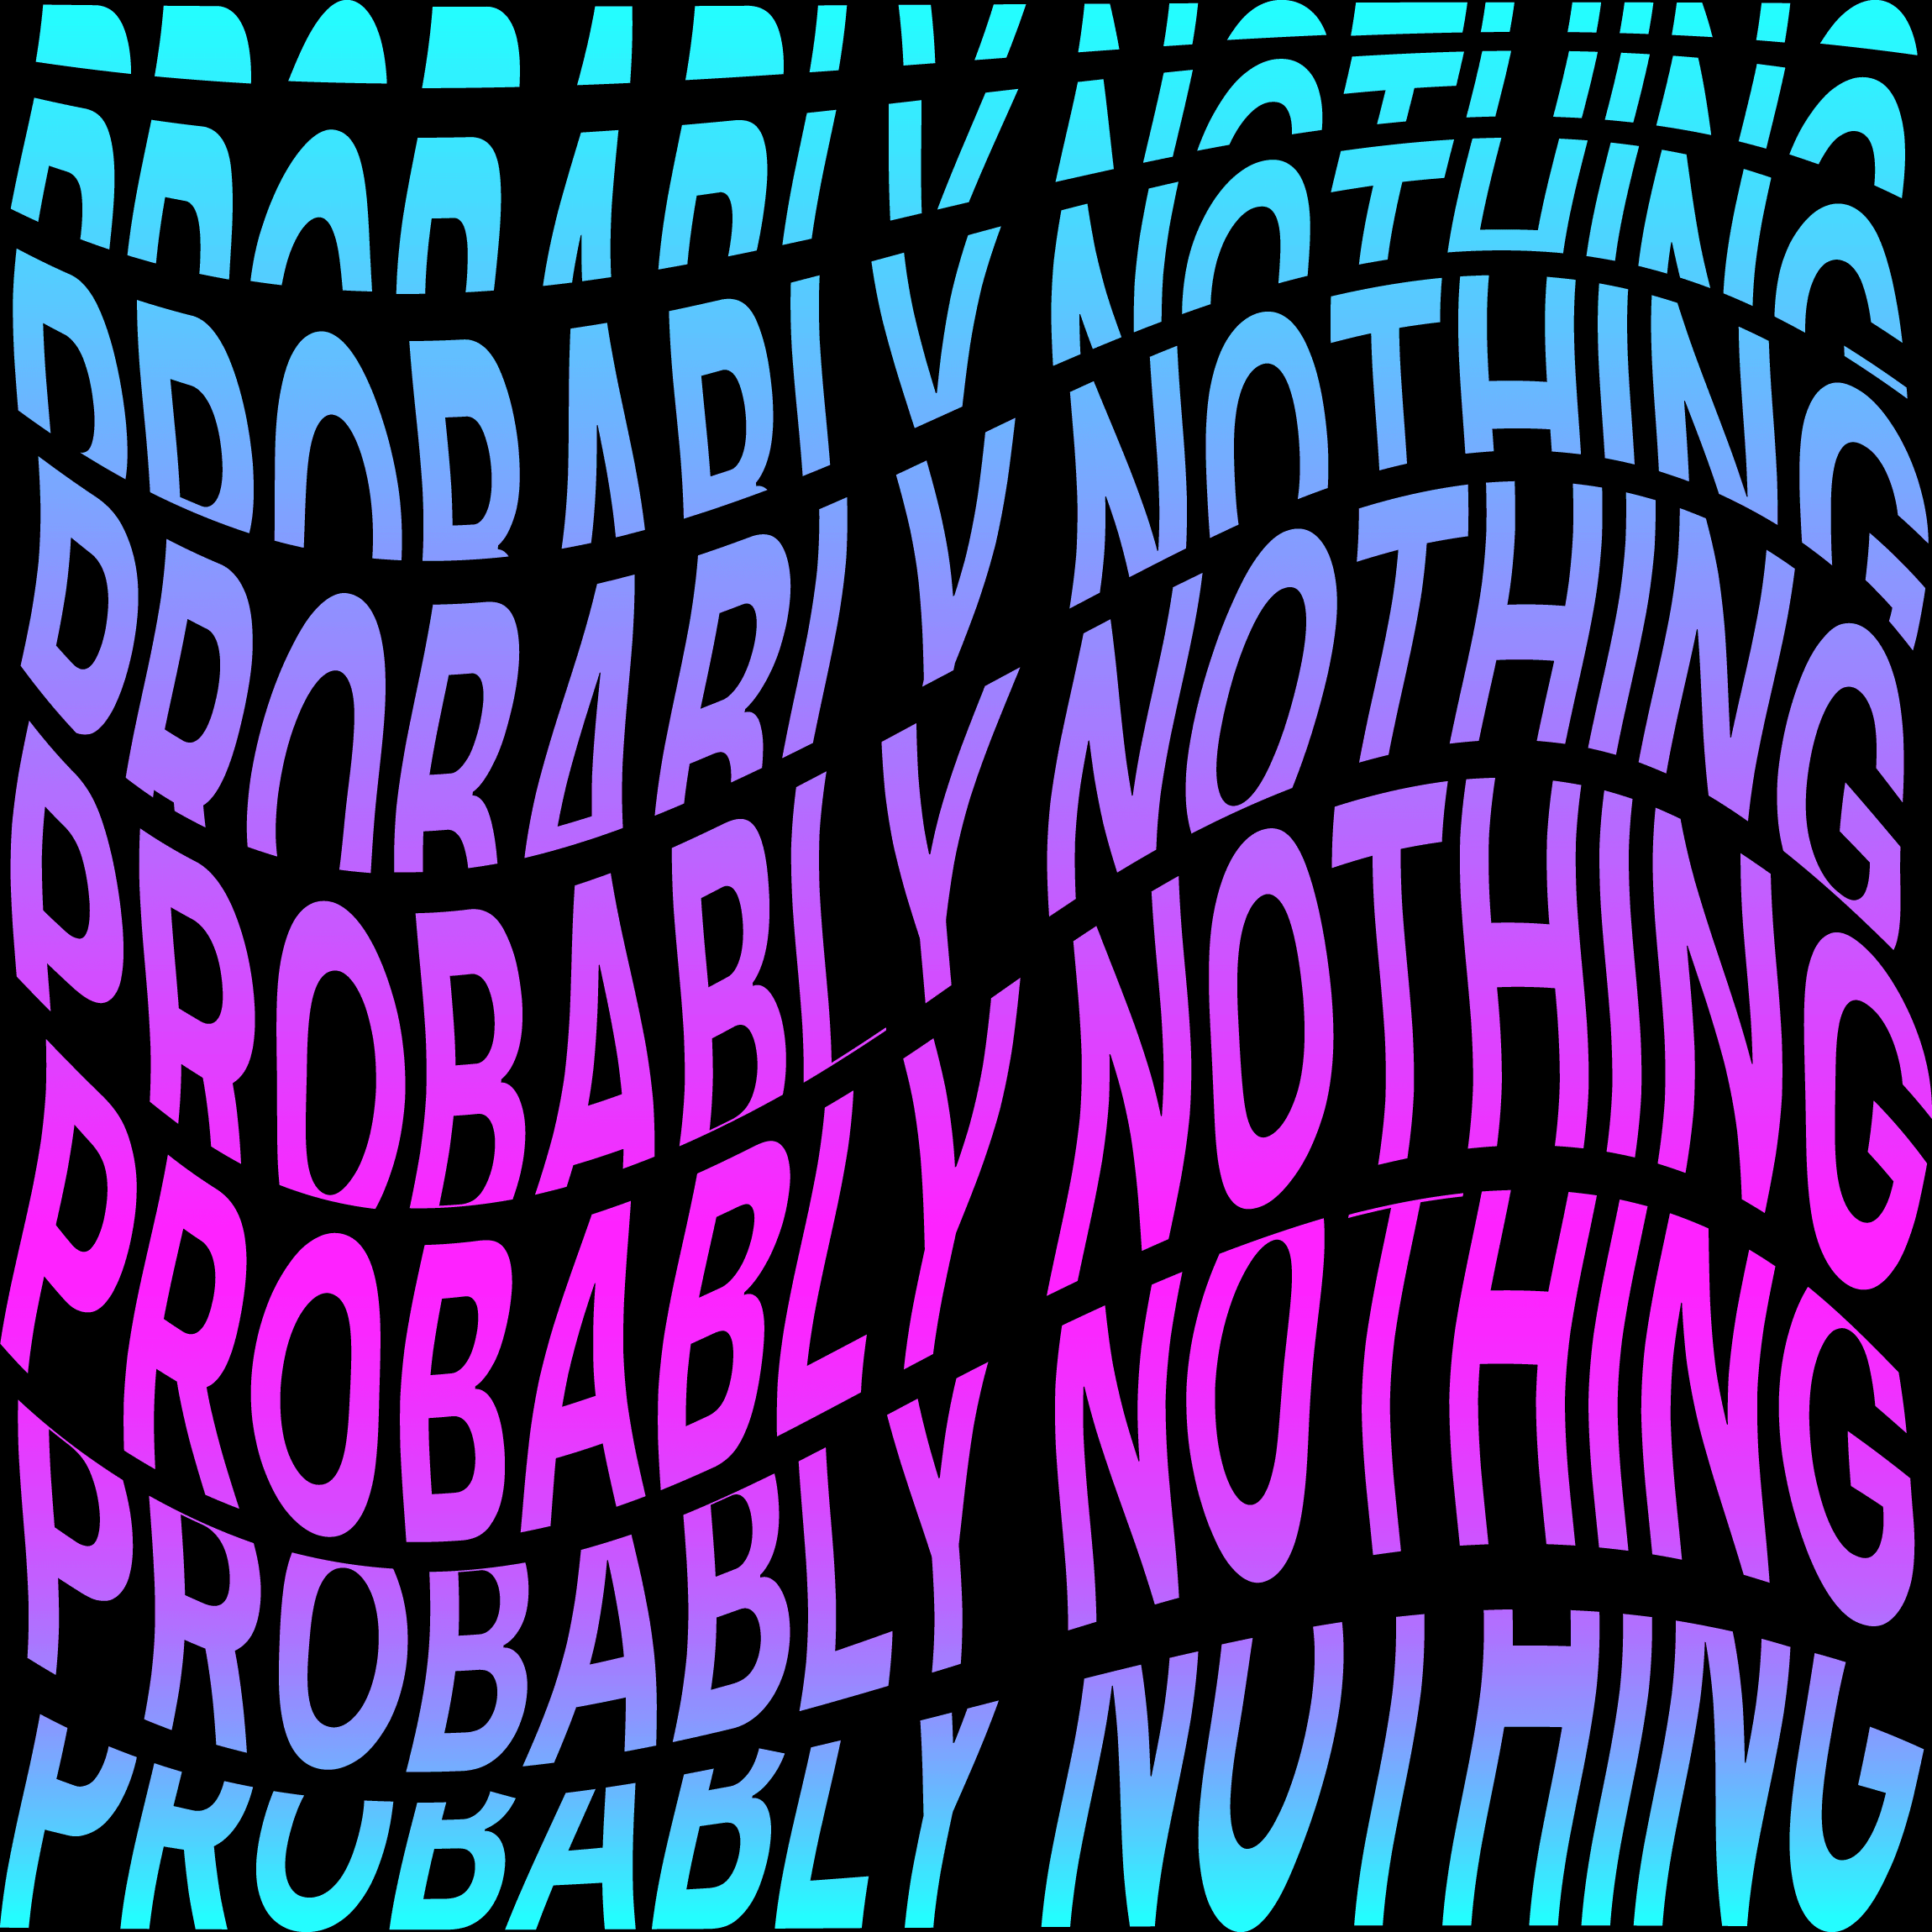 probably nothing